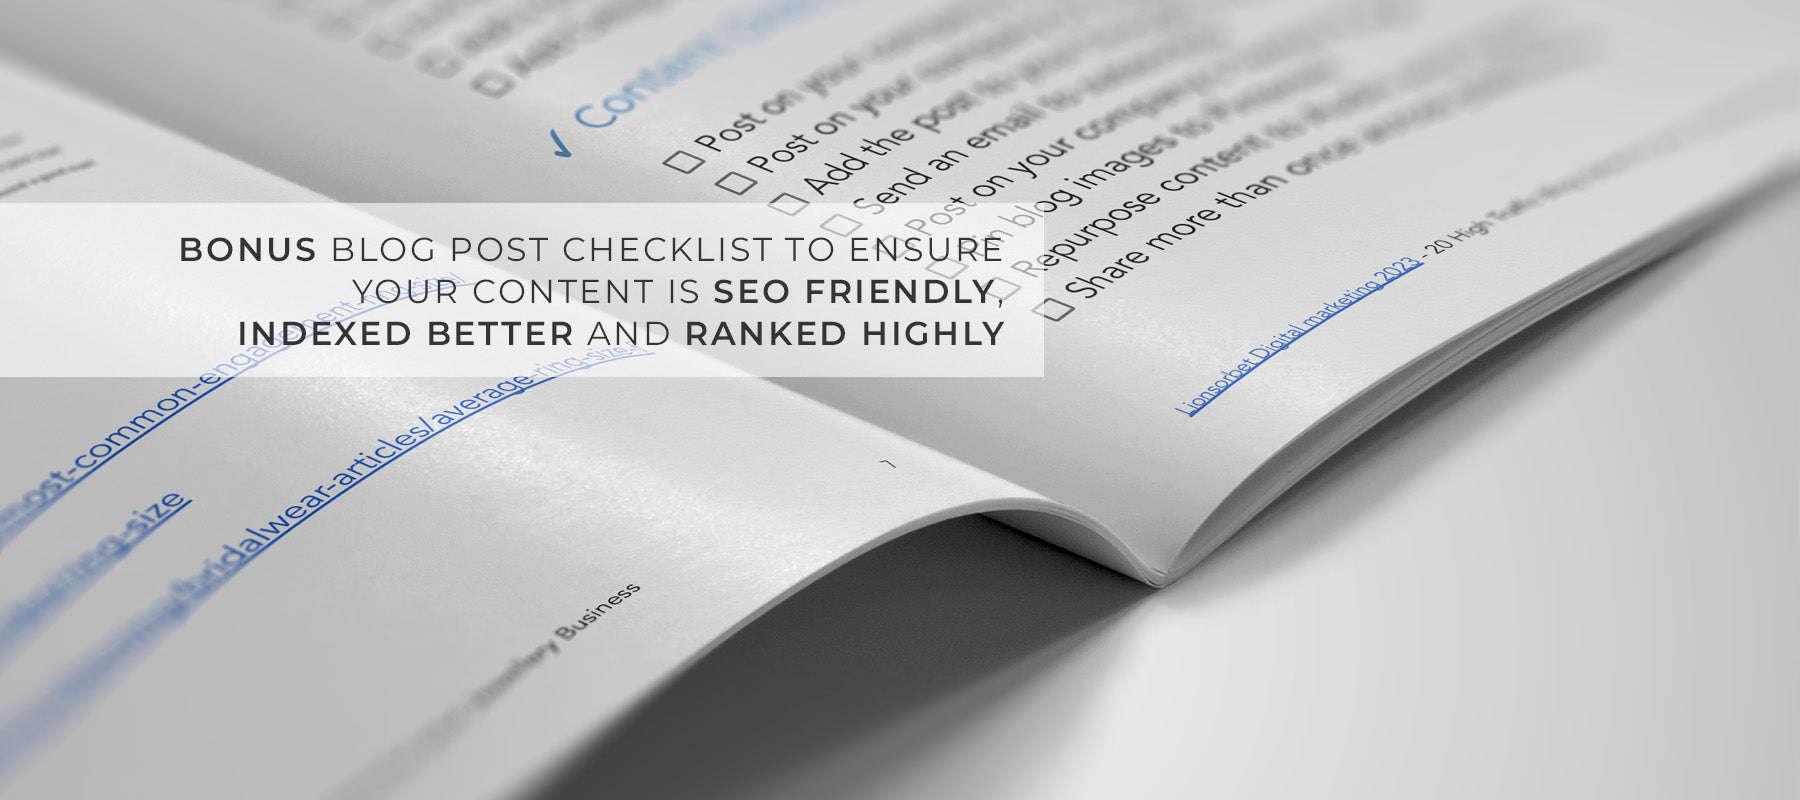 SEO blog post checklist for better content